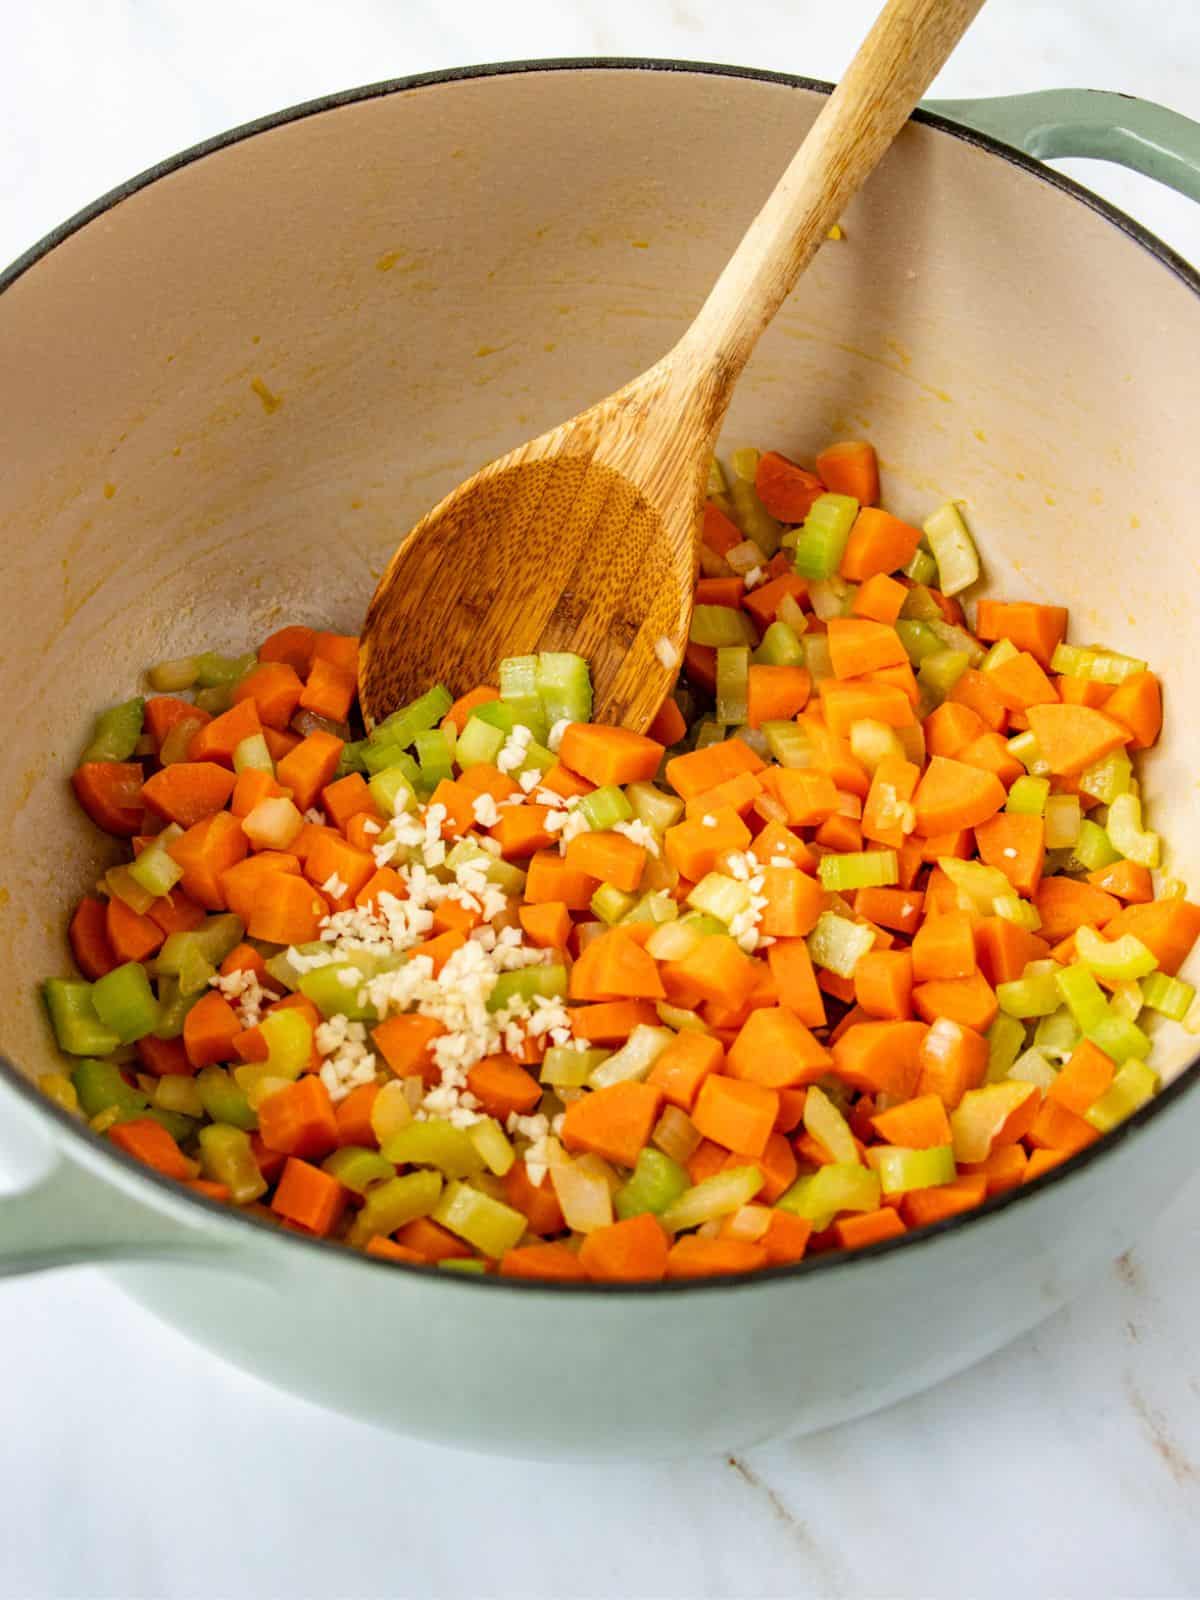 Minced garlic added to pot of diced celery, carrots, and onions.